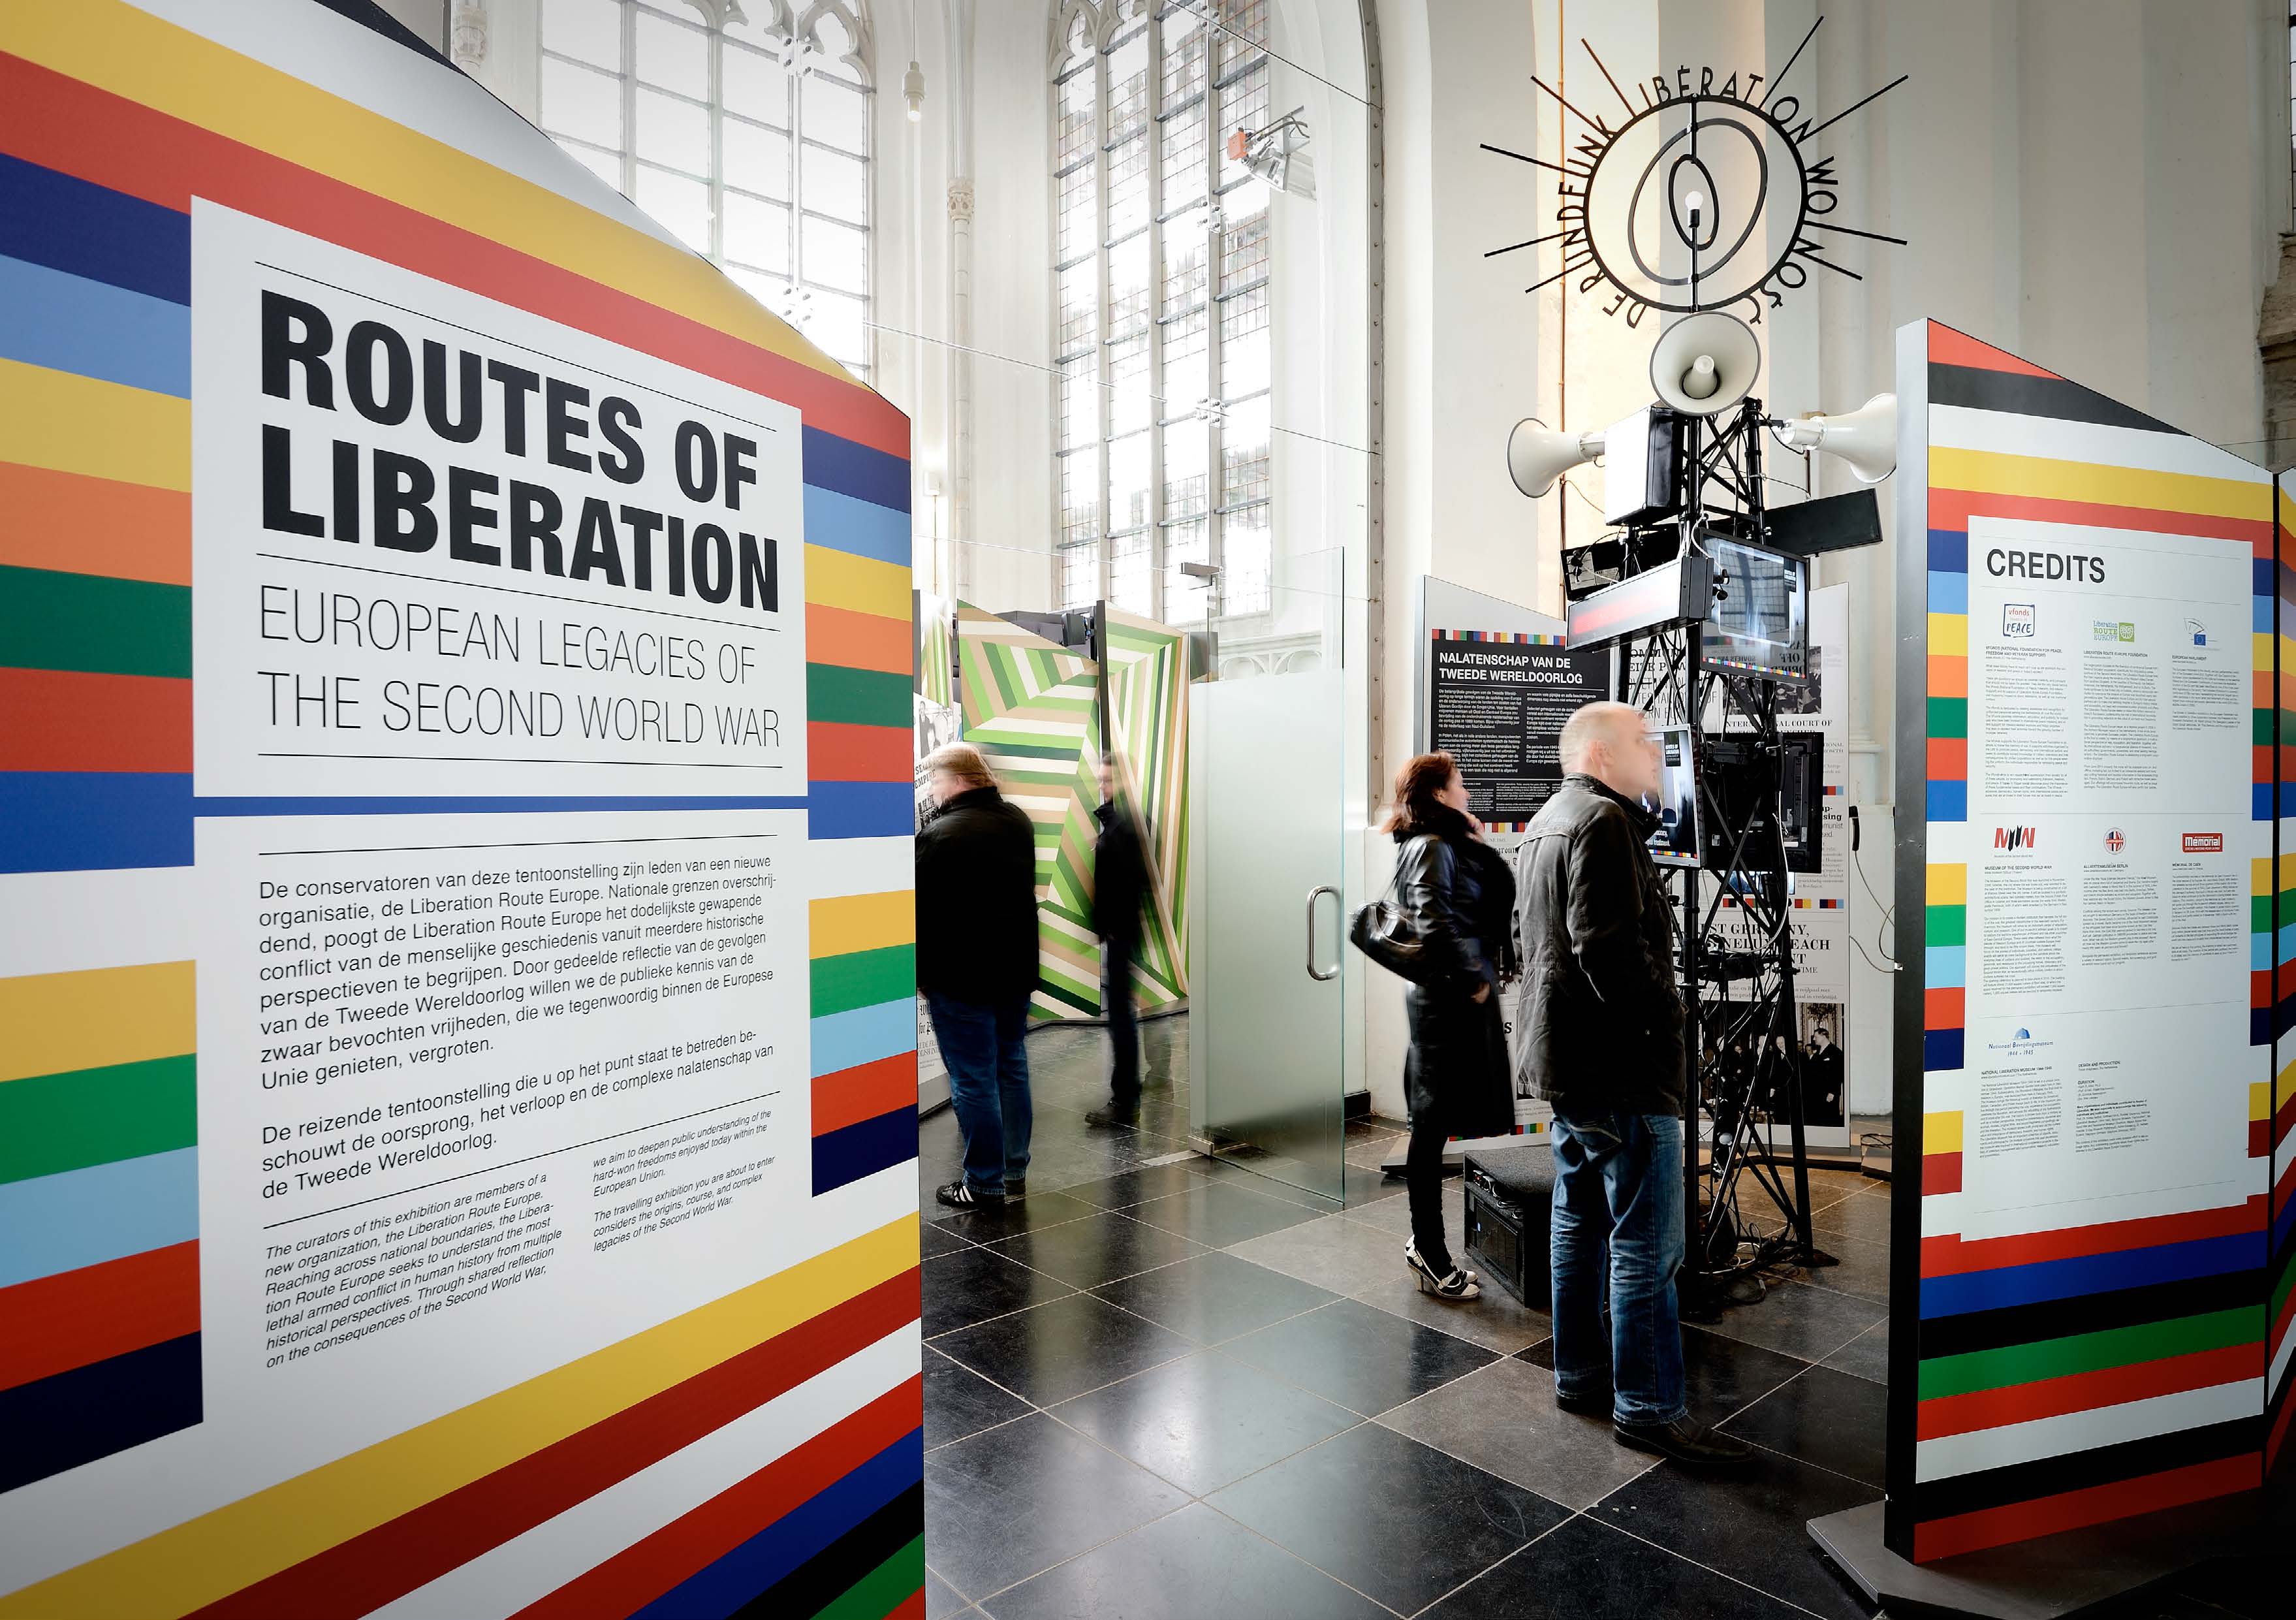 Exhibition of the opening of the Liberation Route Europe